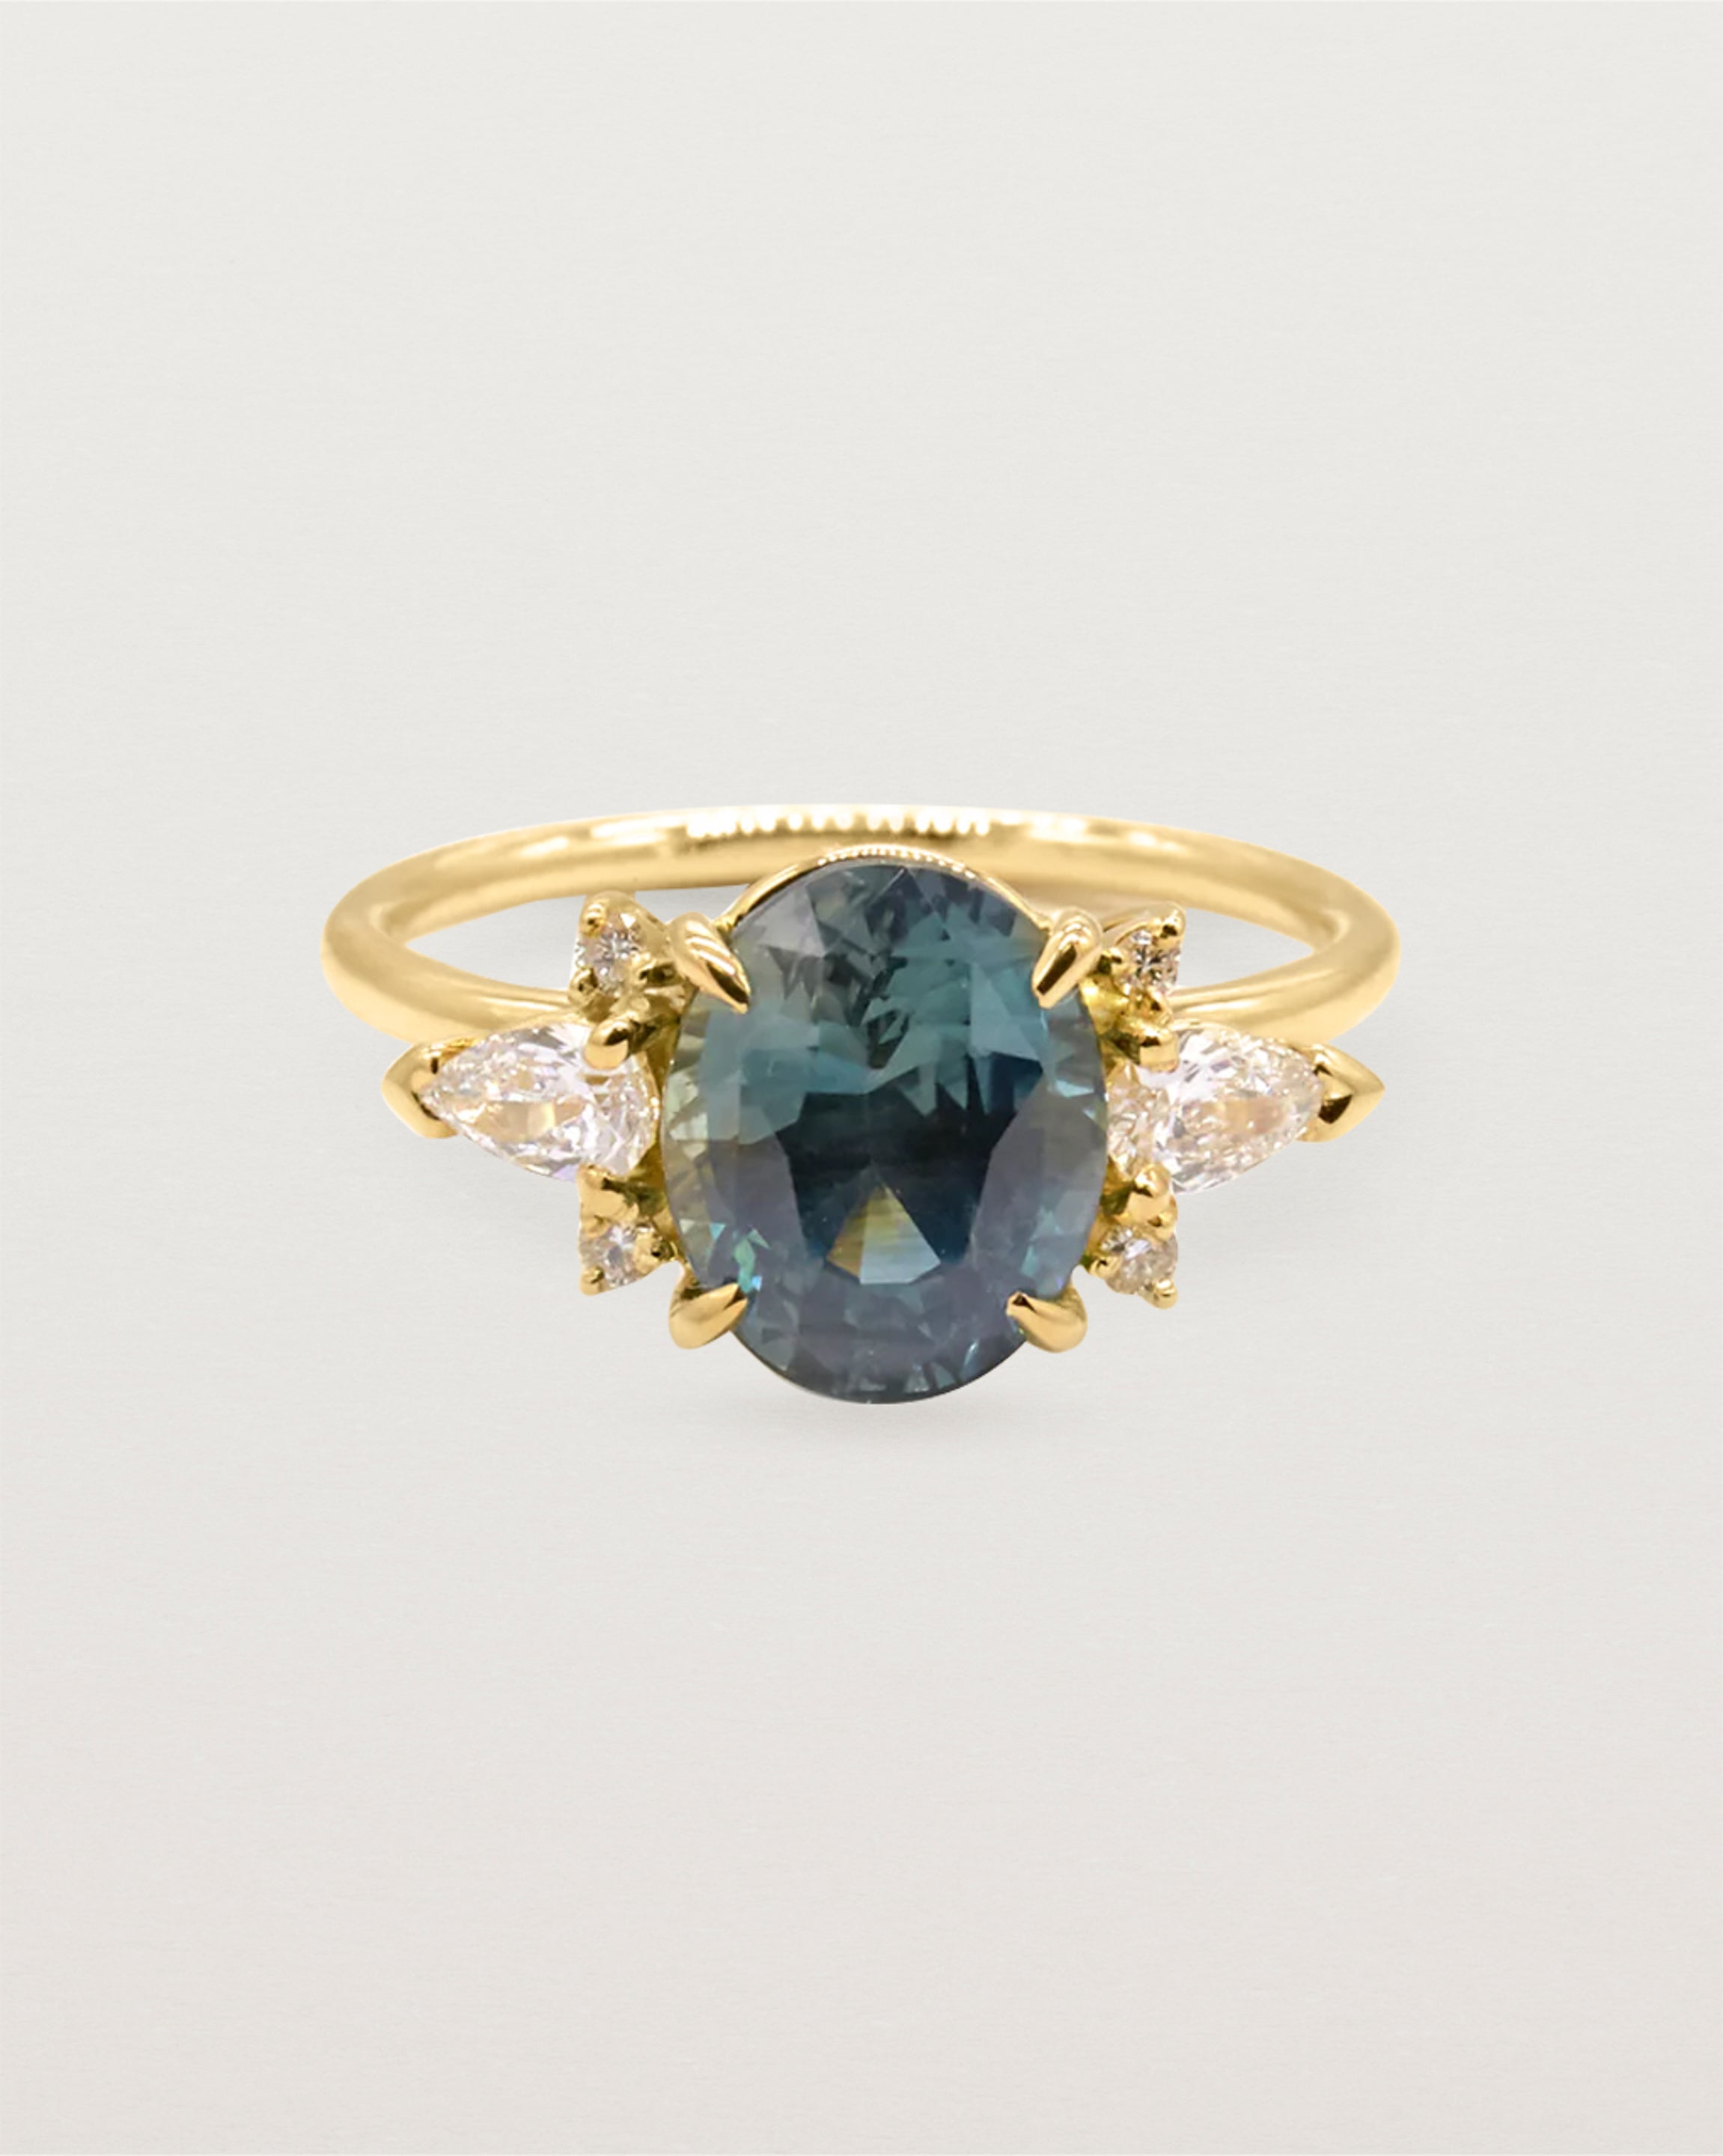 A large oval teal sapphire adorned with white diamond clusters, crafted in yellow gold